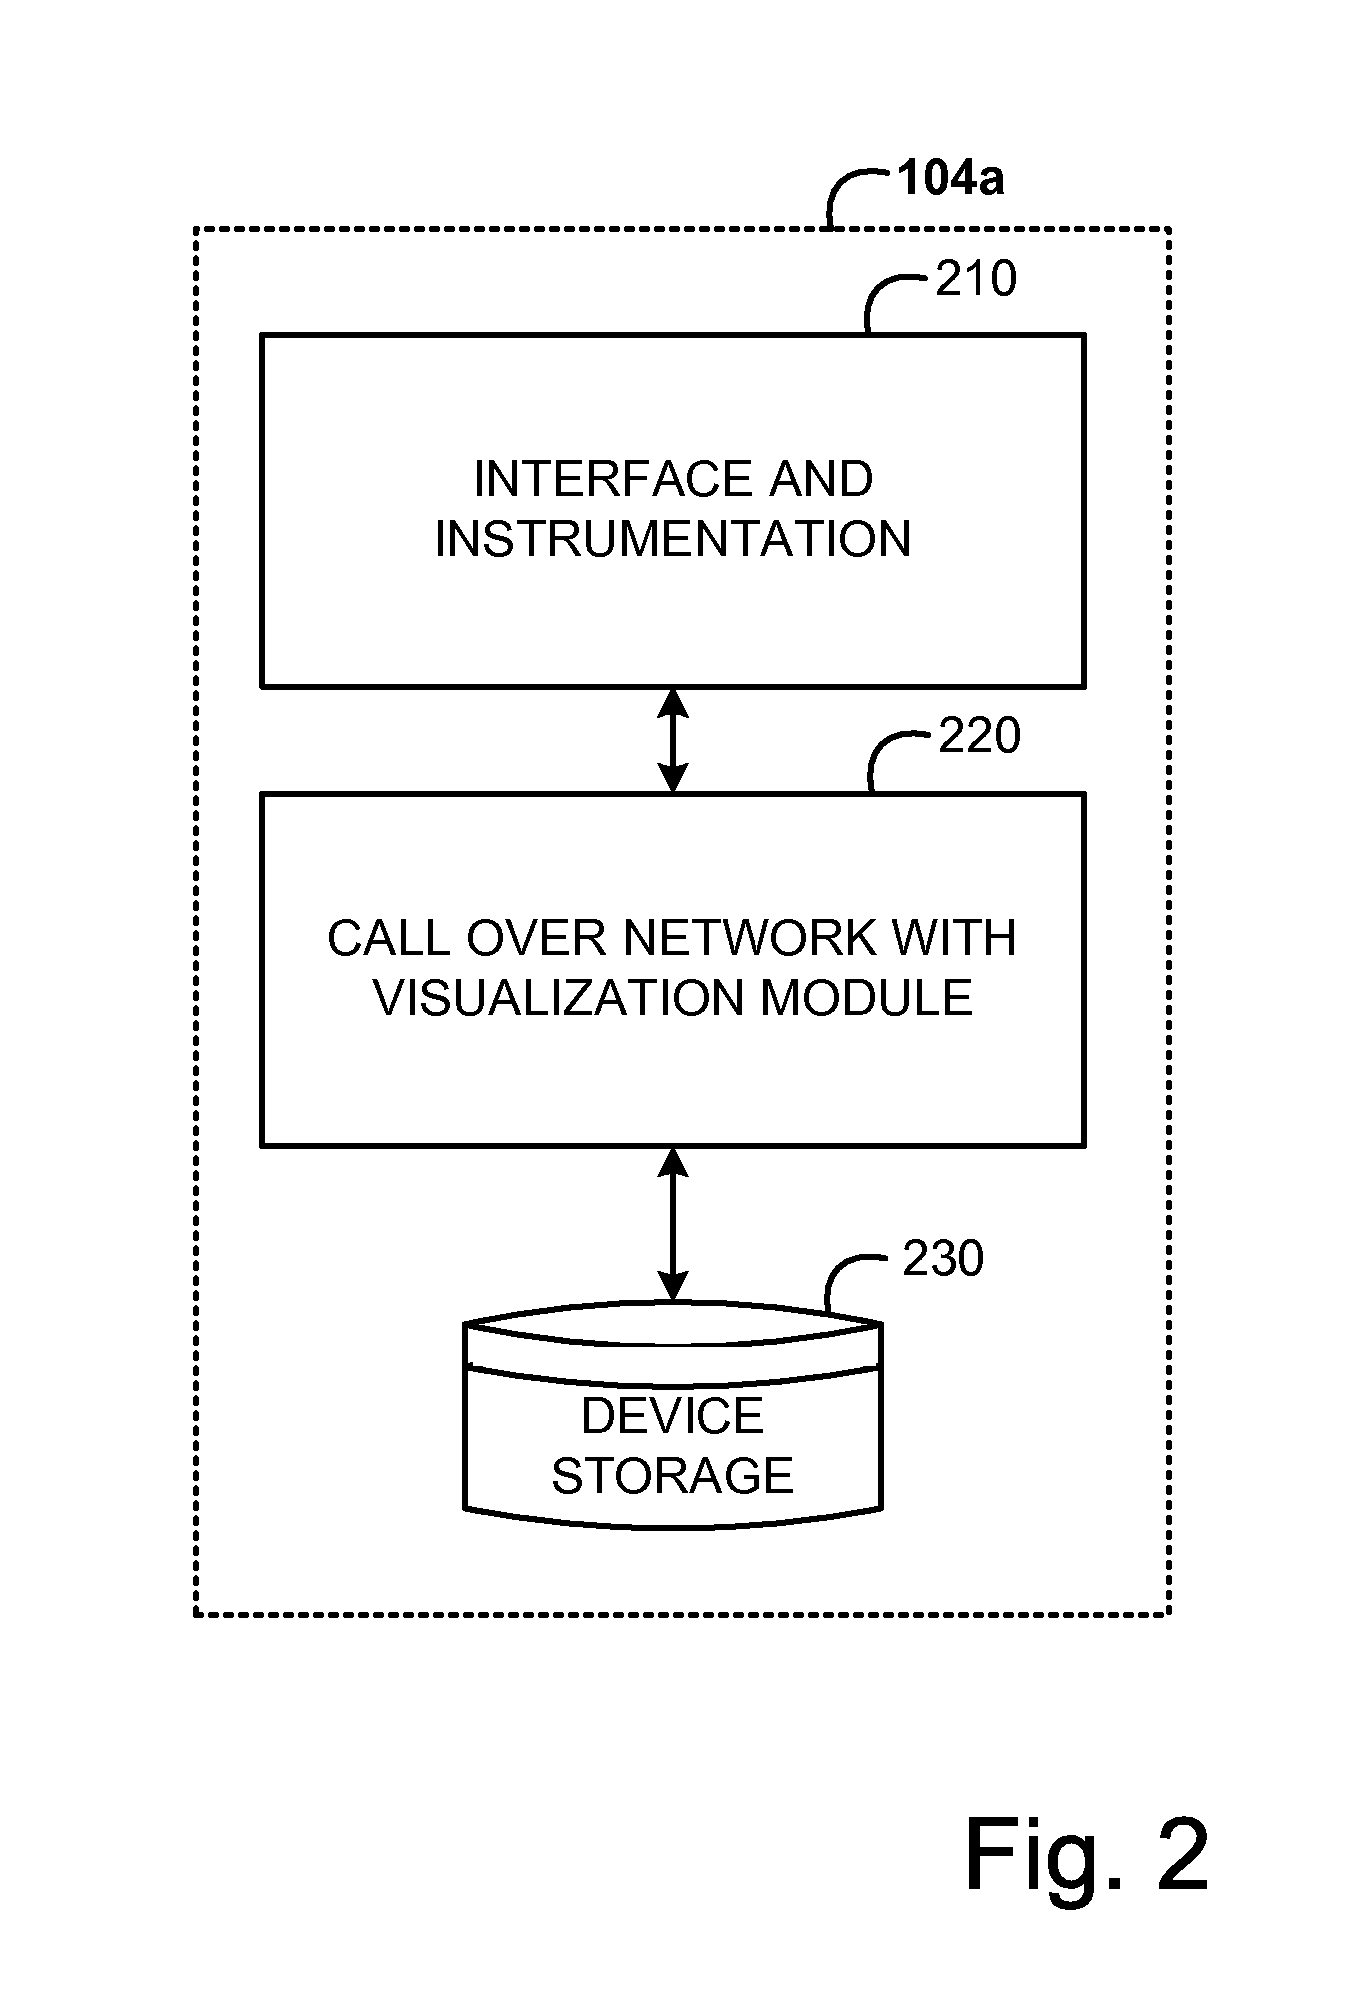 Systems and methods for visualizing a call over network